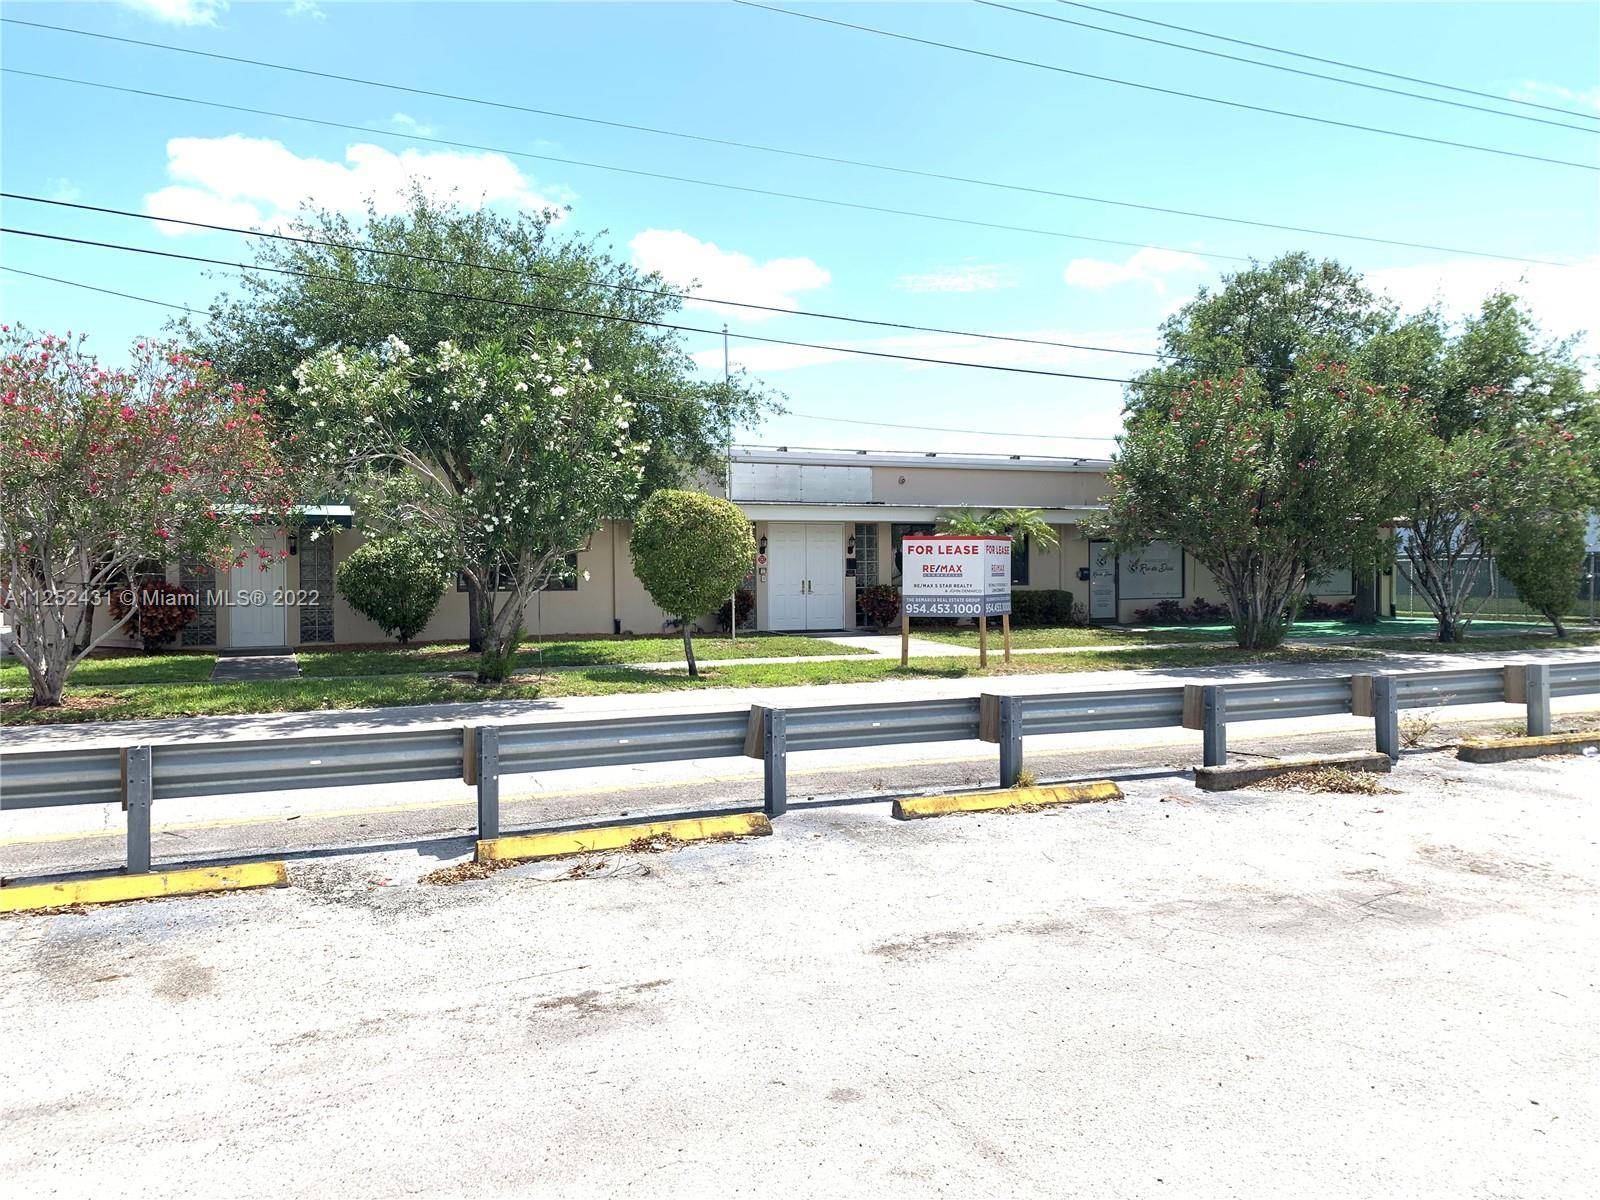 This 9, 615 SF flex space building is a perfect blend of office and true industrial, situated on a large 19, 540 SF lot.